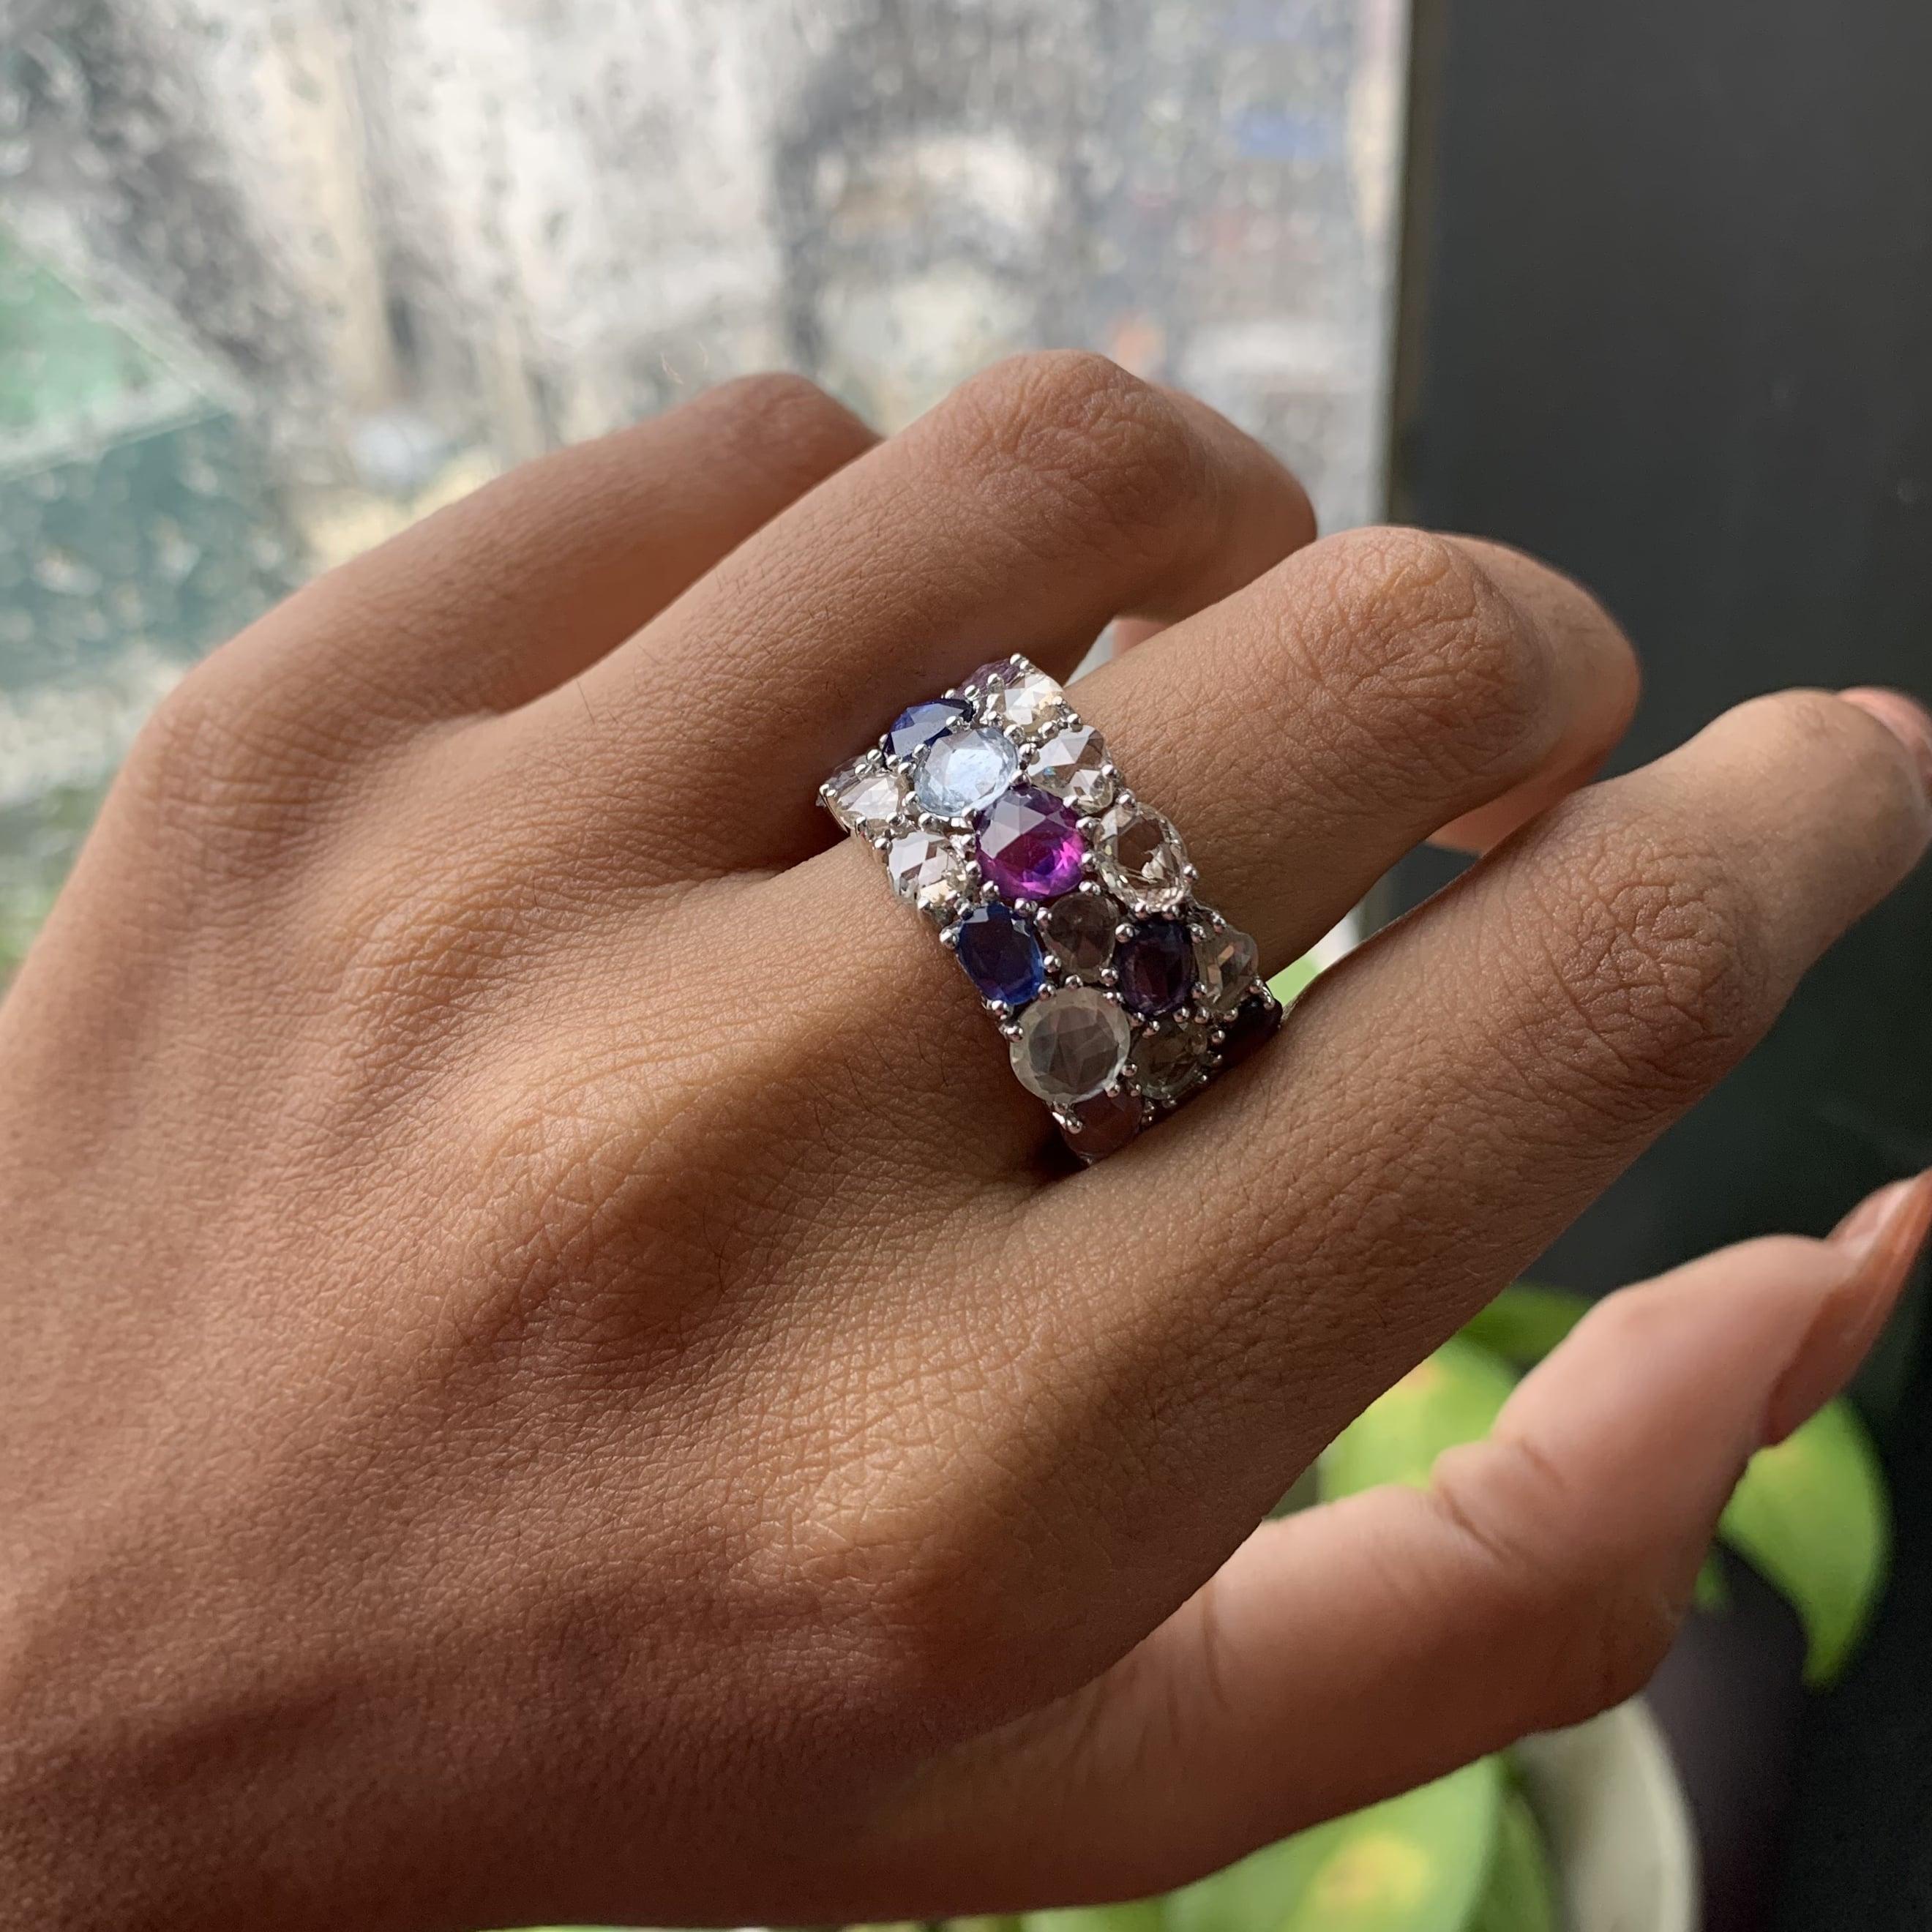 This ring is crafted from 14K White Gold and adorned with an impressive array of 10.48 Carat Multi Sapphires. These sapphires, in a rose cut style, capture just the right amount of light to showcase their vibrant colors beautifully. Additionally,